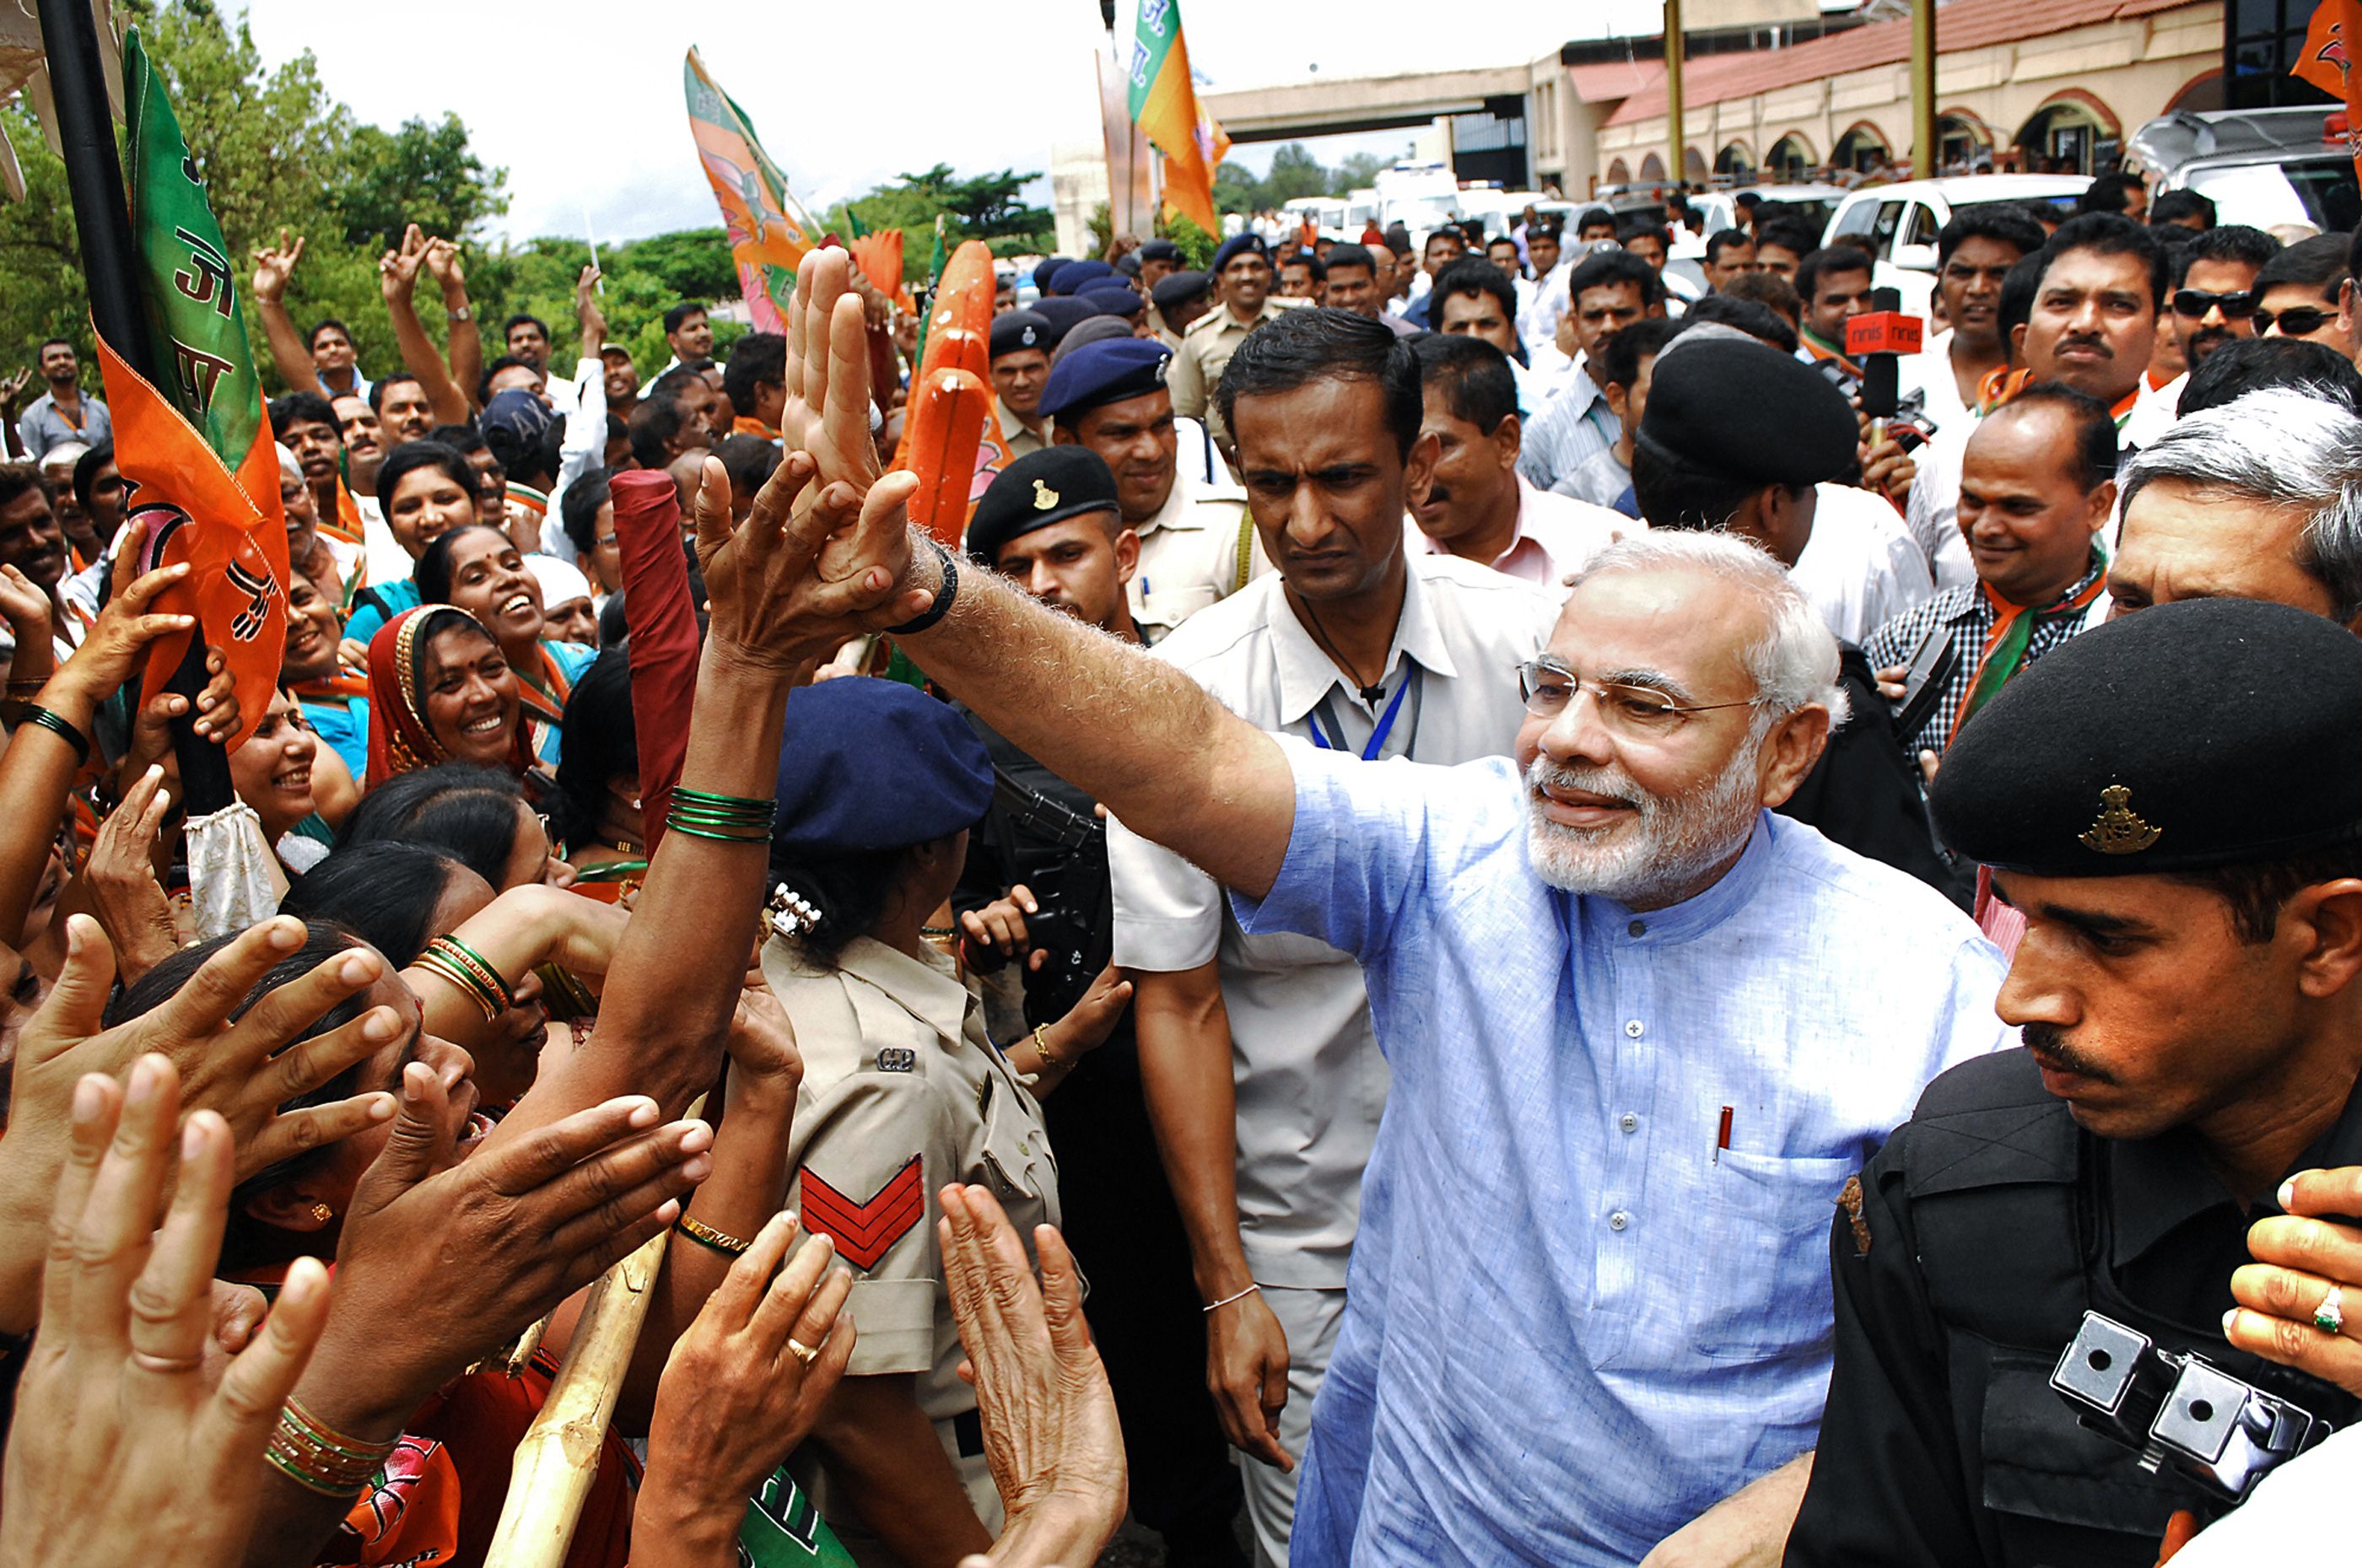 Narendra Modi (in blue) greets supporters upon arrival in Goa on Friday. Photo: AFP